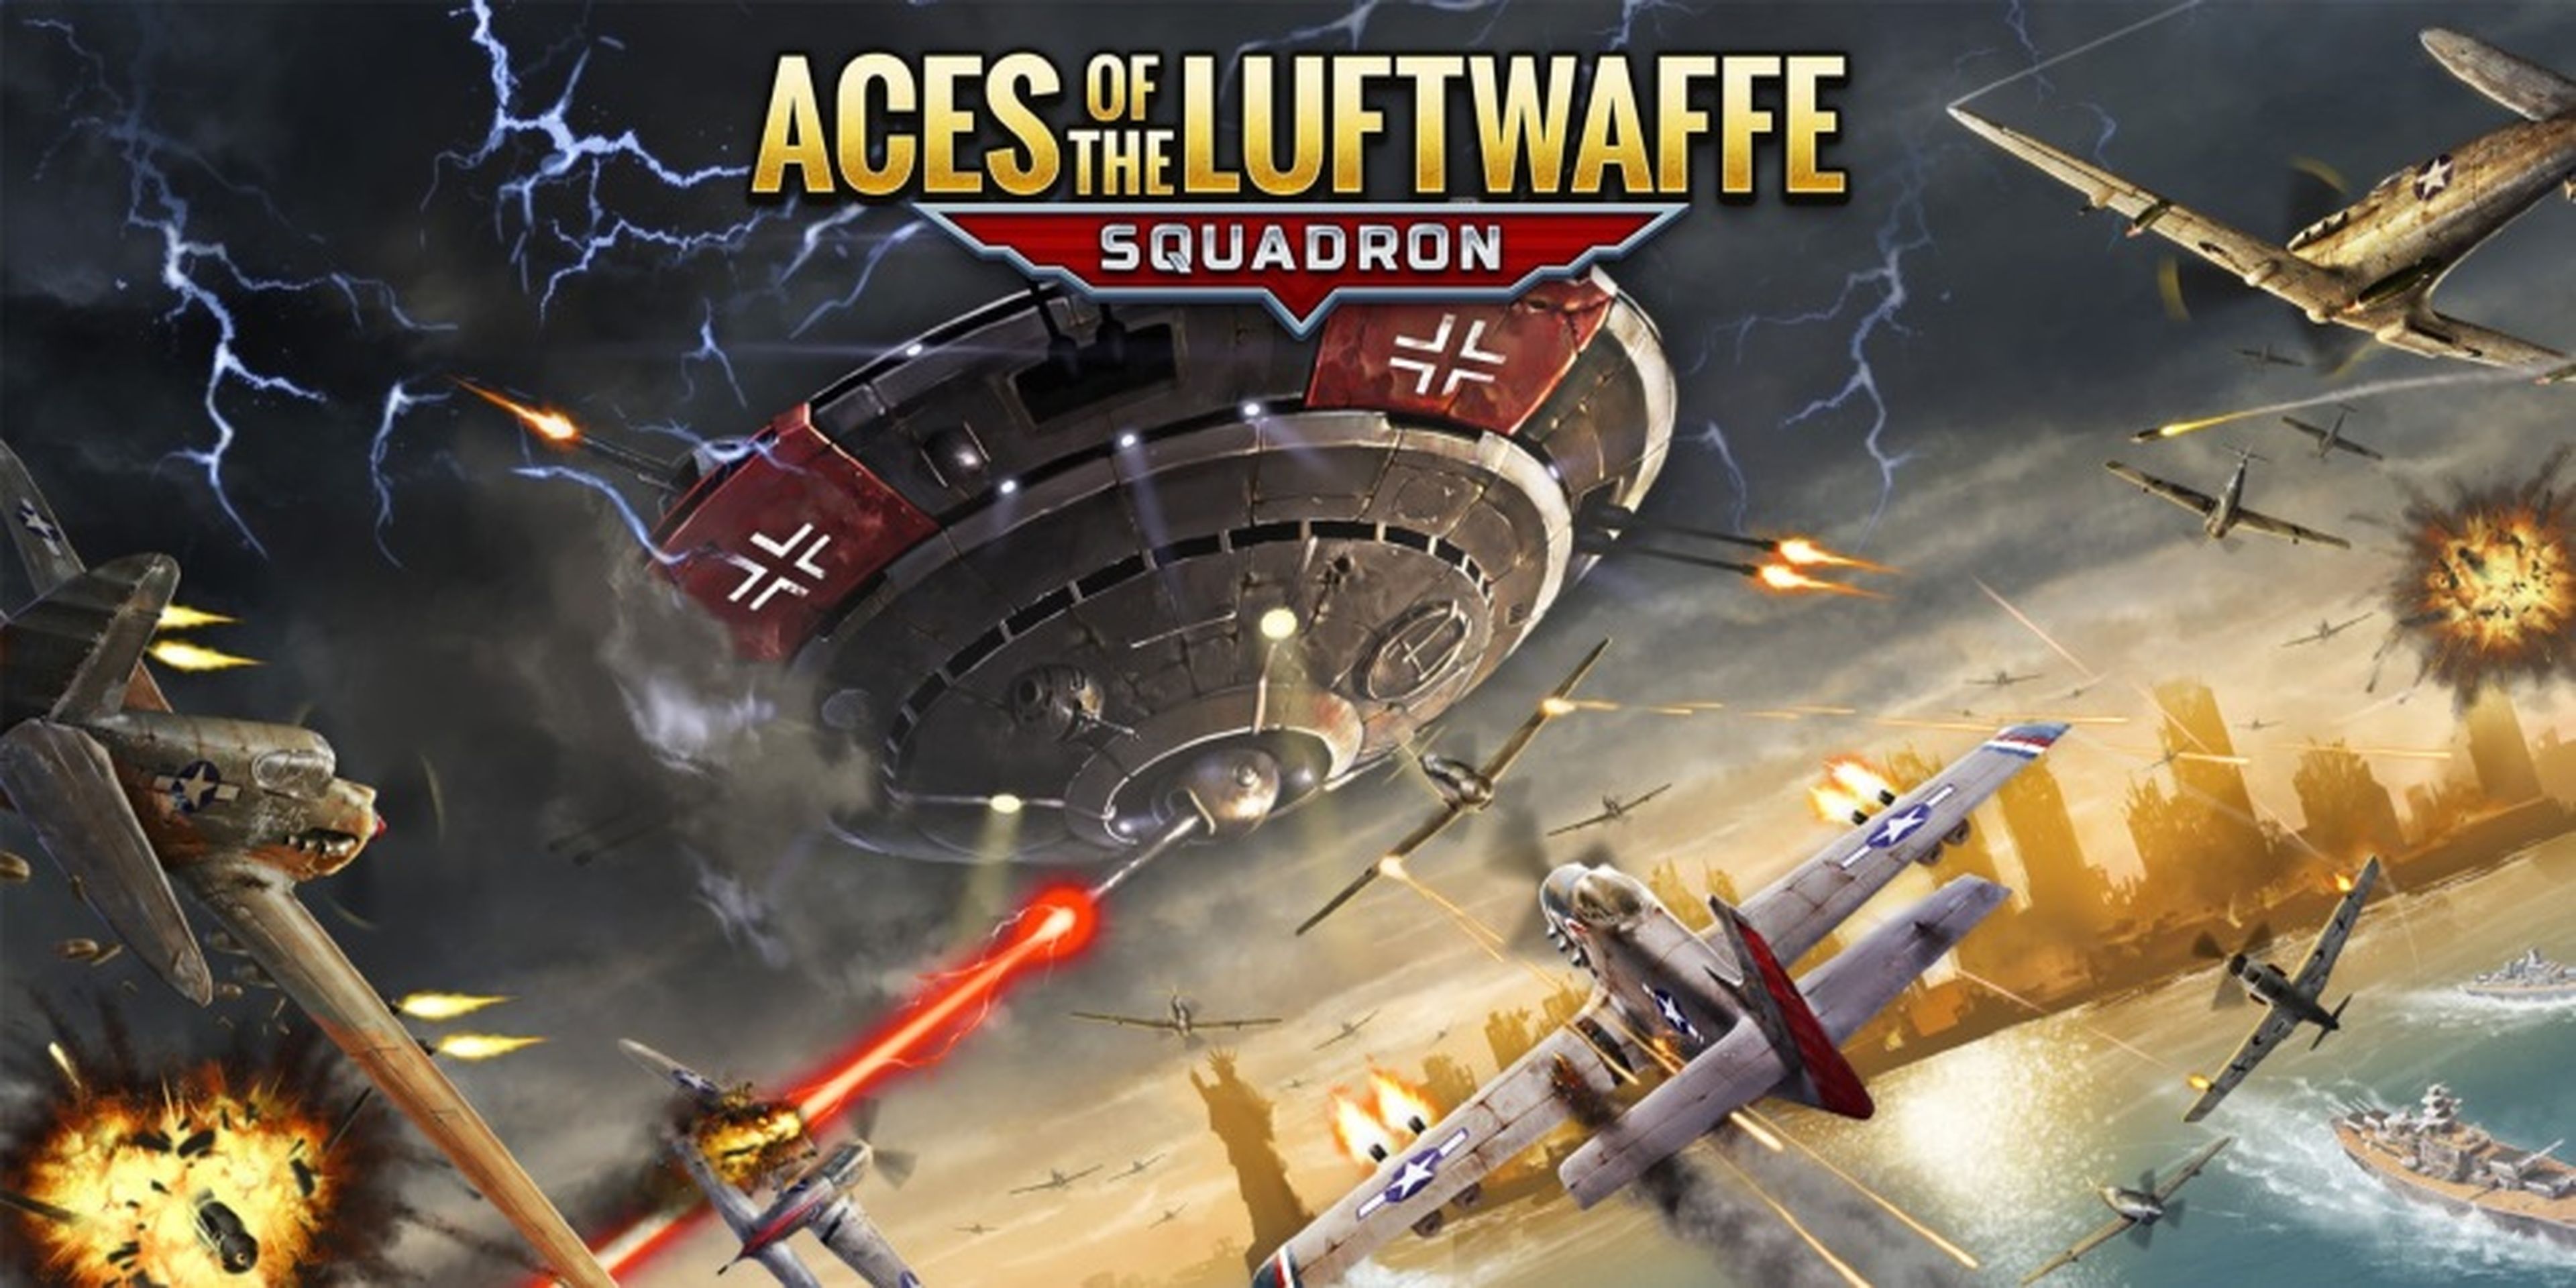 Aces of the Luftwaffe - Squadron ​